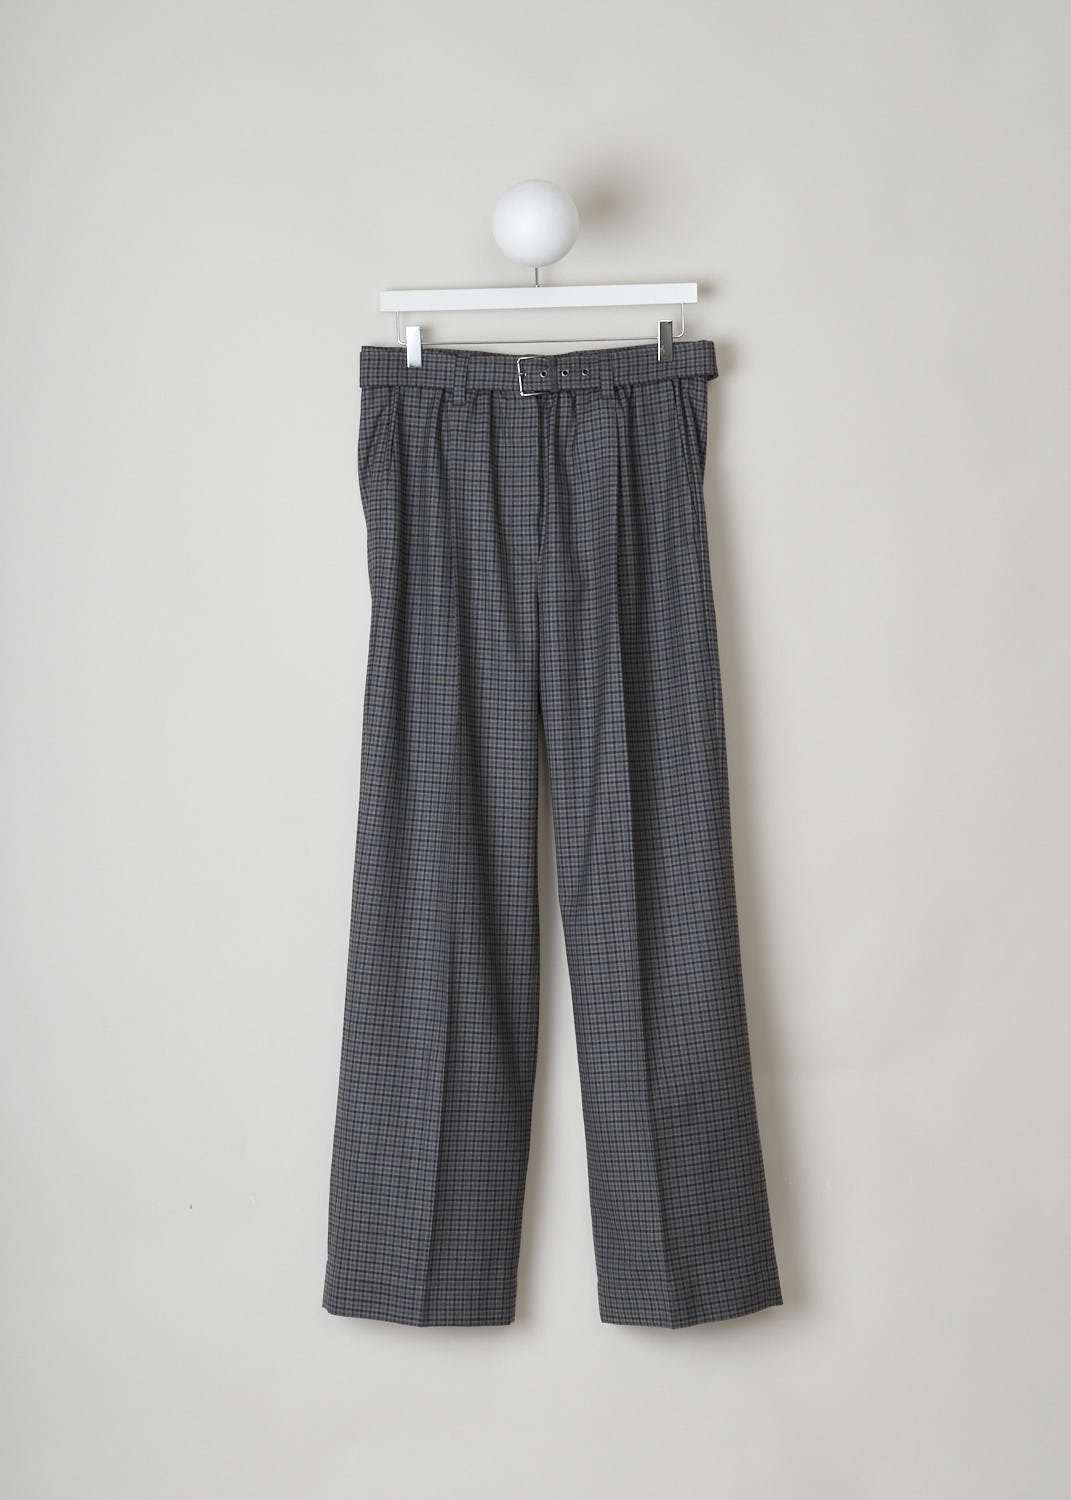 BRUNELLO CUCINELLI, GREY CHECKERED WOOL TROUSERS, MA197P7404_C001, Grey, Front, These grey checkered wool trousers feature a partly elasticated waistband with a detachable belt in the same checkered fabric. The belt has a subtle beaded embellishment. These trousers have slanted pockets and a pleated front and straight, loose fitting pant legs. In the back, two welt pockets can be found. 
